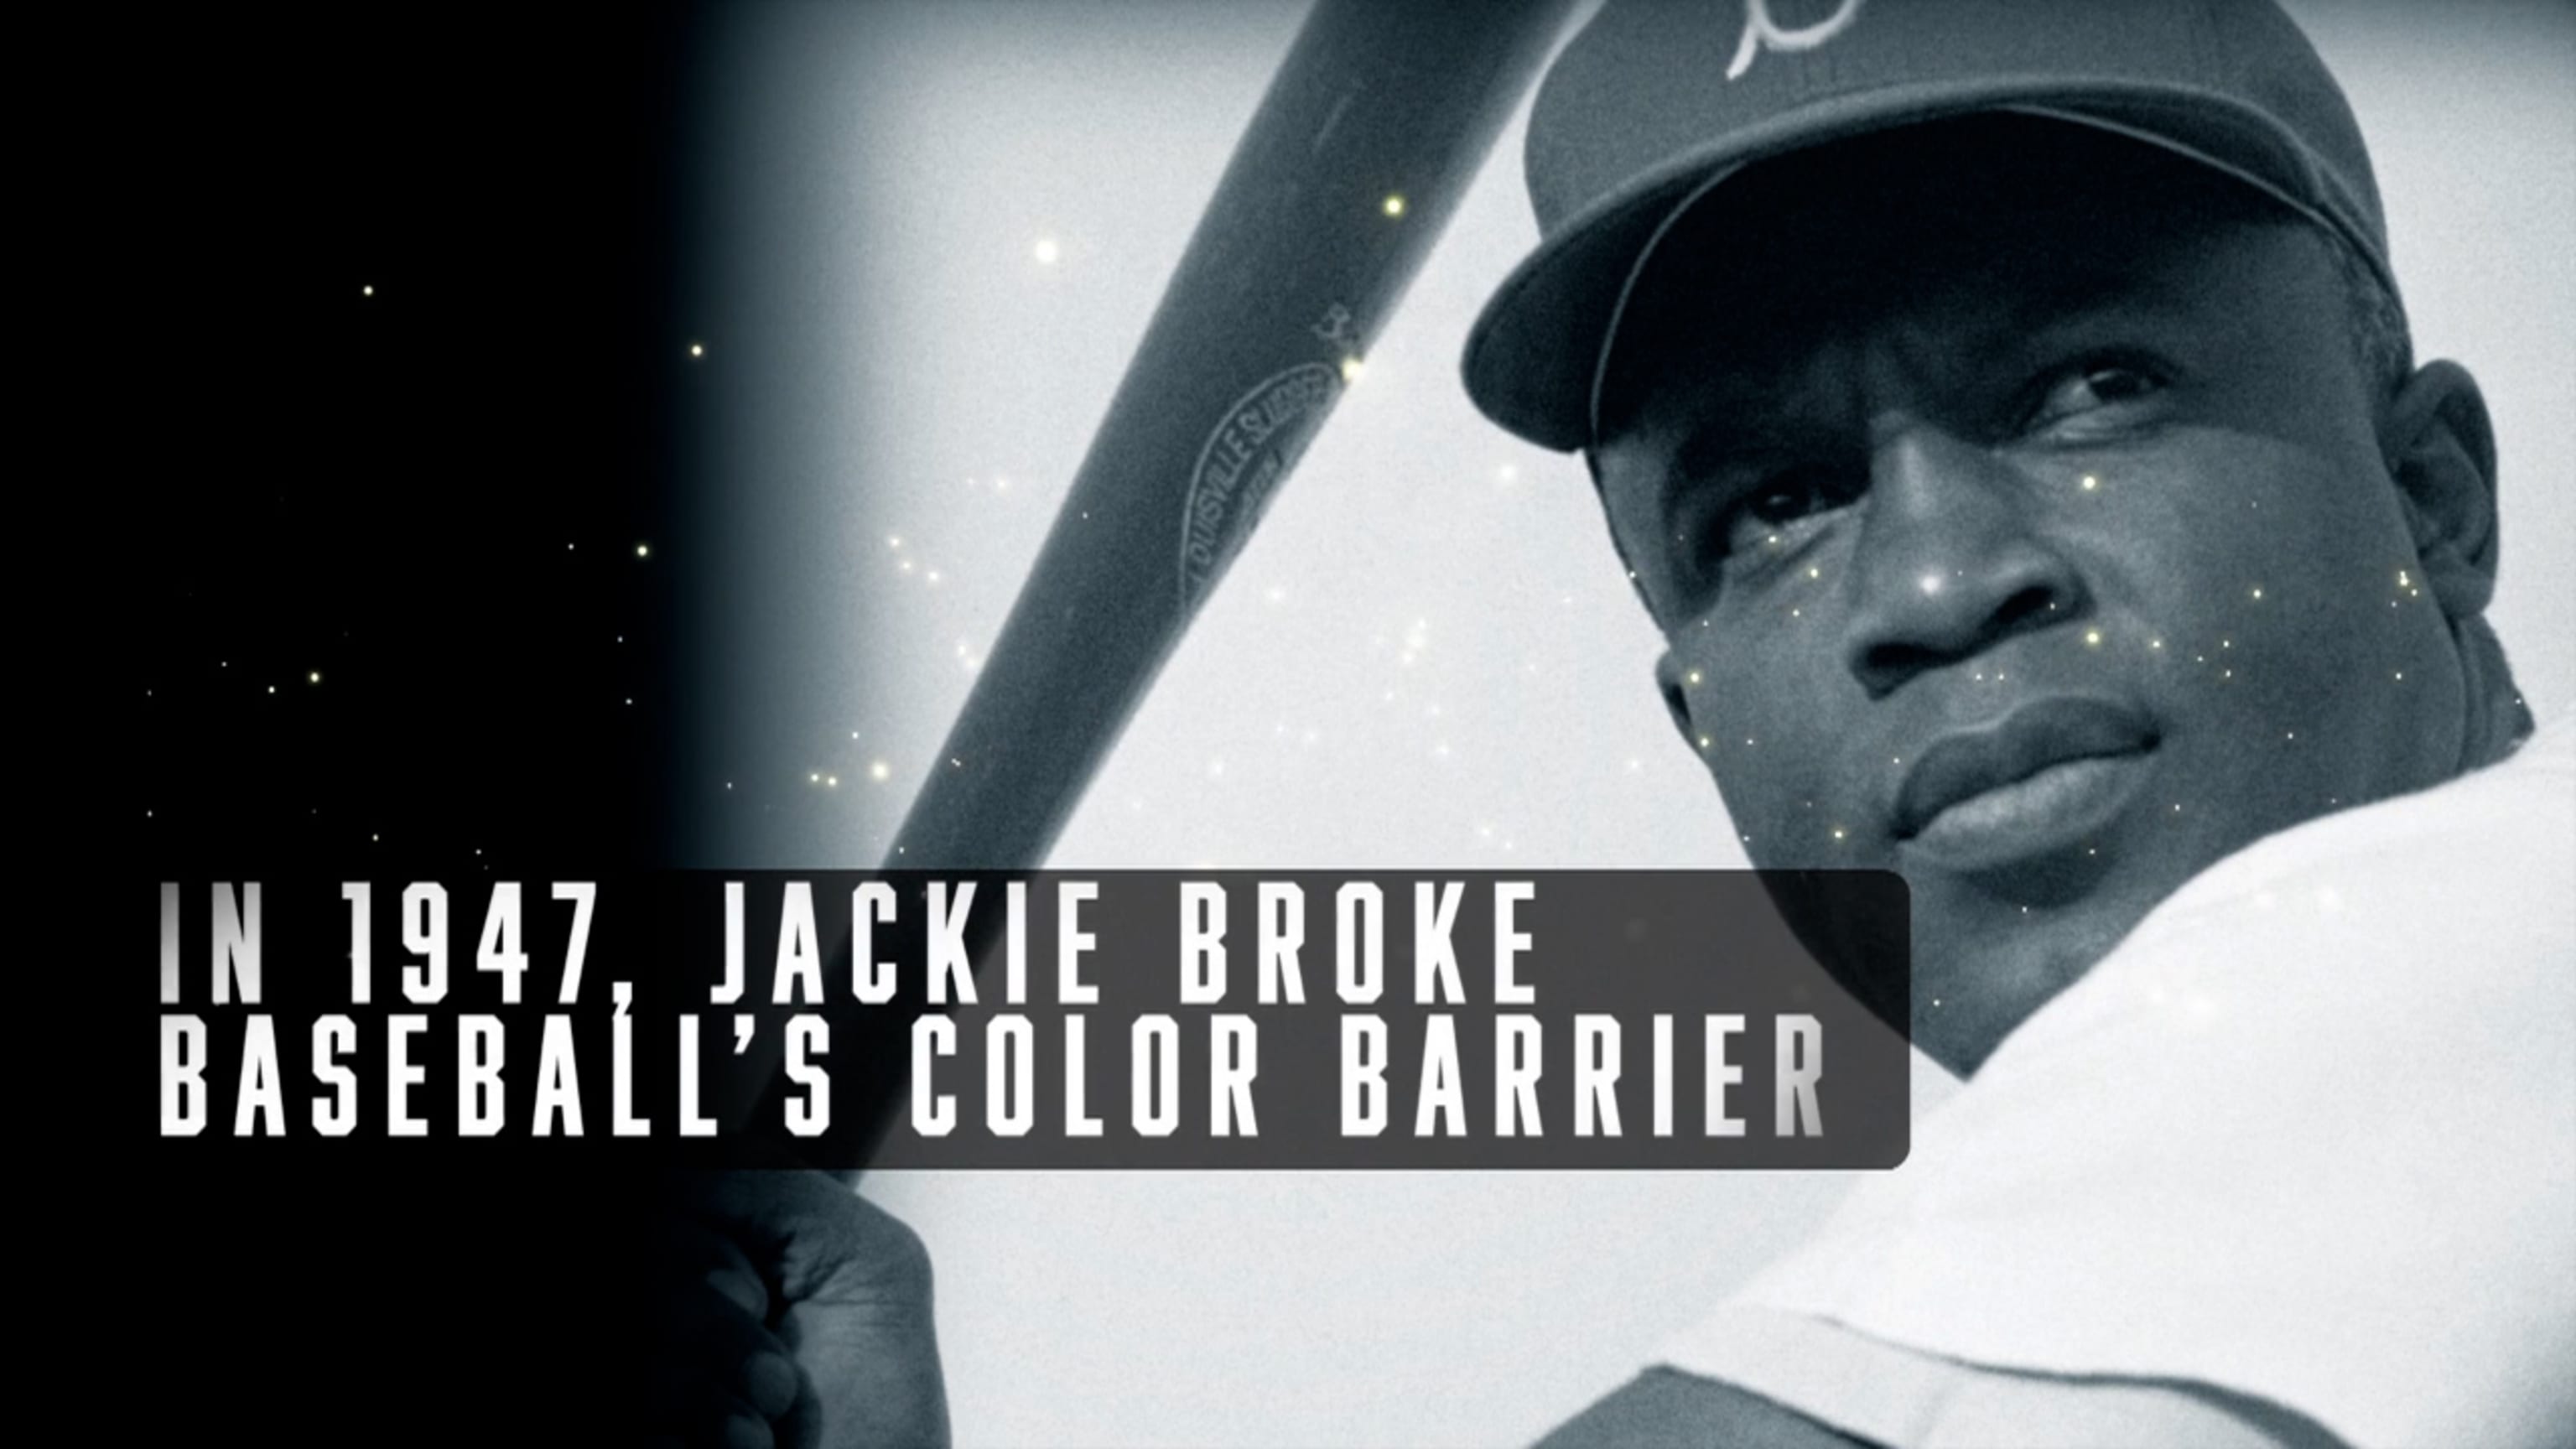 Jackie Robinson Day in MLB: Son delivers powerful message to Dodgers